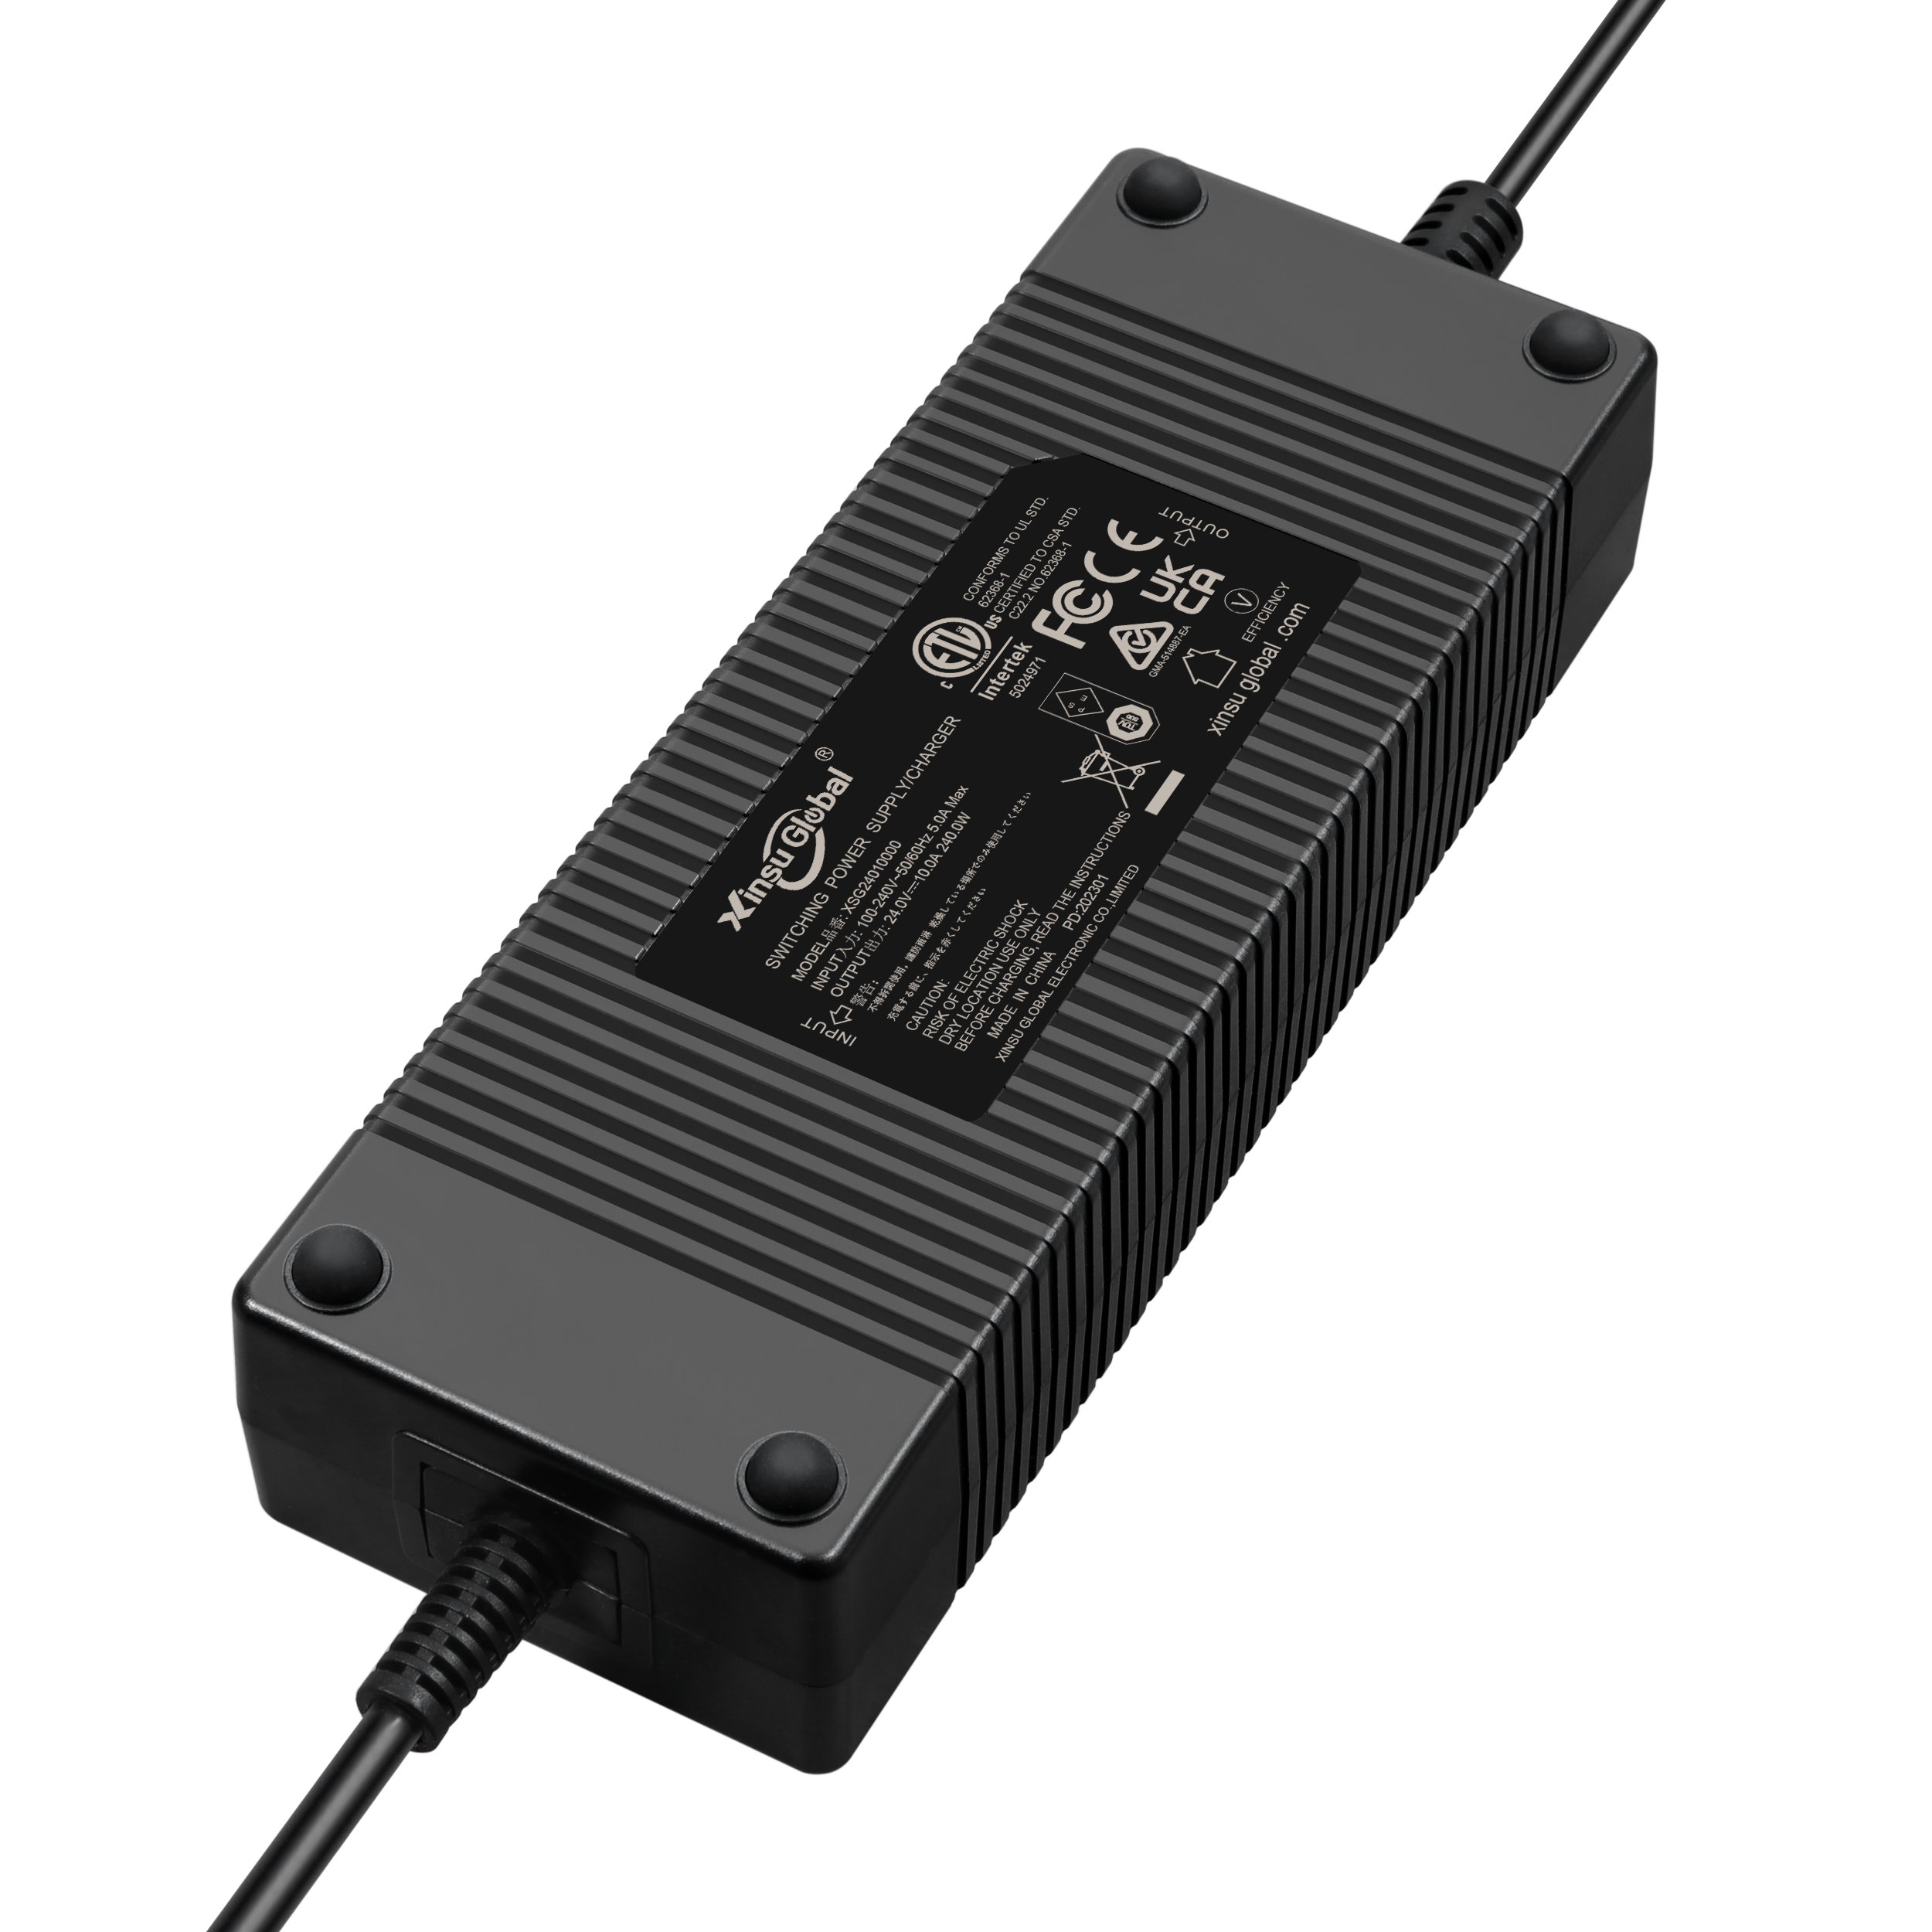 24v-10a-power-adapter.png